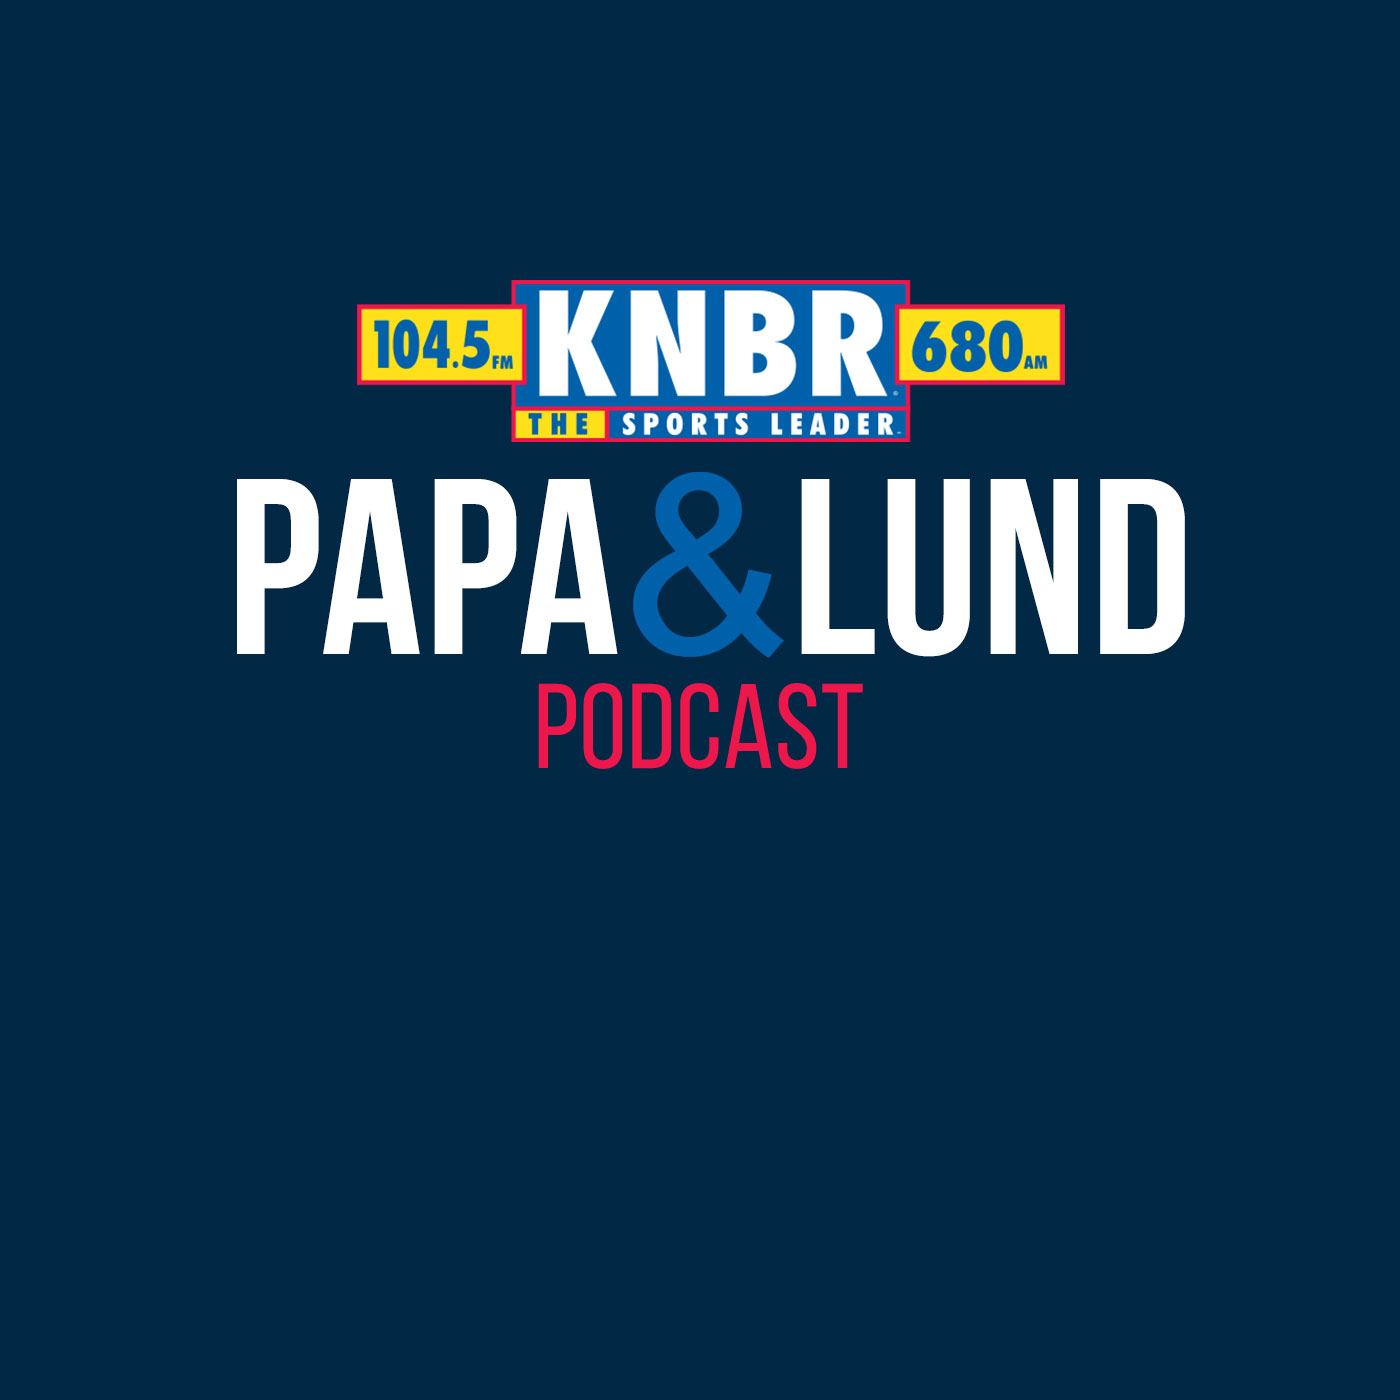 11-3 Scott Pioli joins Papa & Lund to break down a wild NFL Trade deadline, grades the Christian McCaffrey trade as well as how the NFL landscape as shifted after the trade deadline